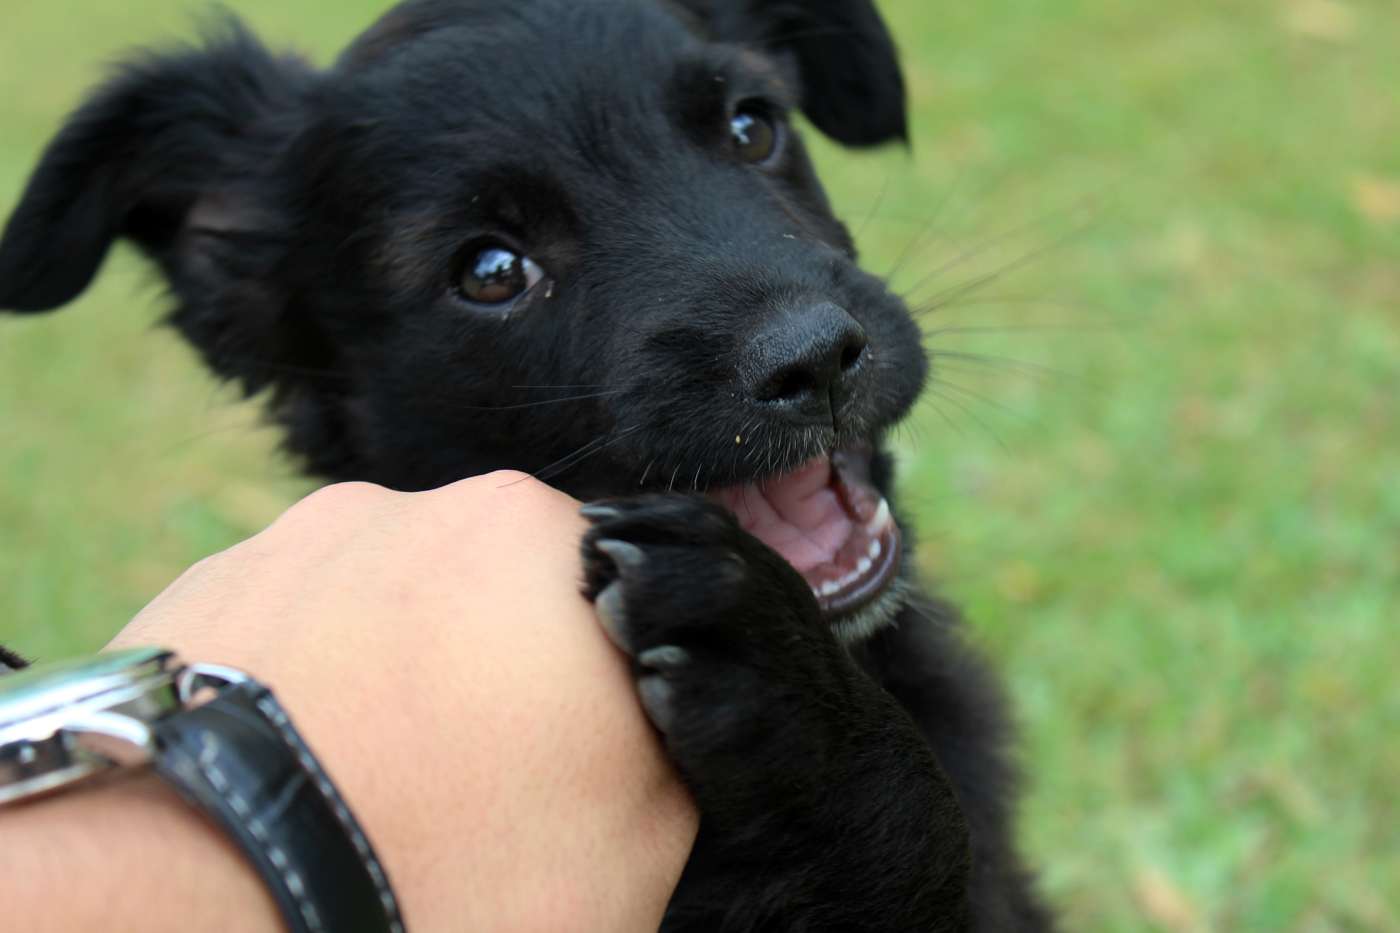 A puppy licking the hand of its owner